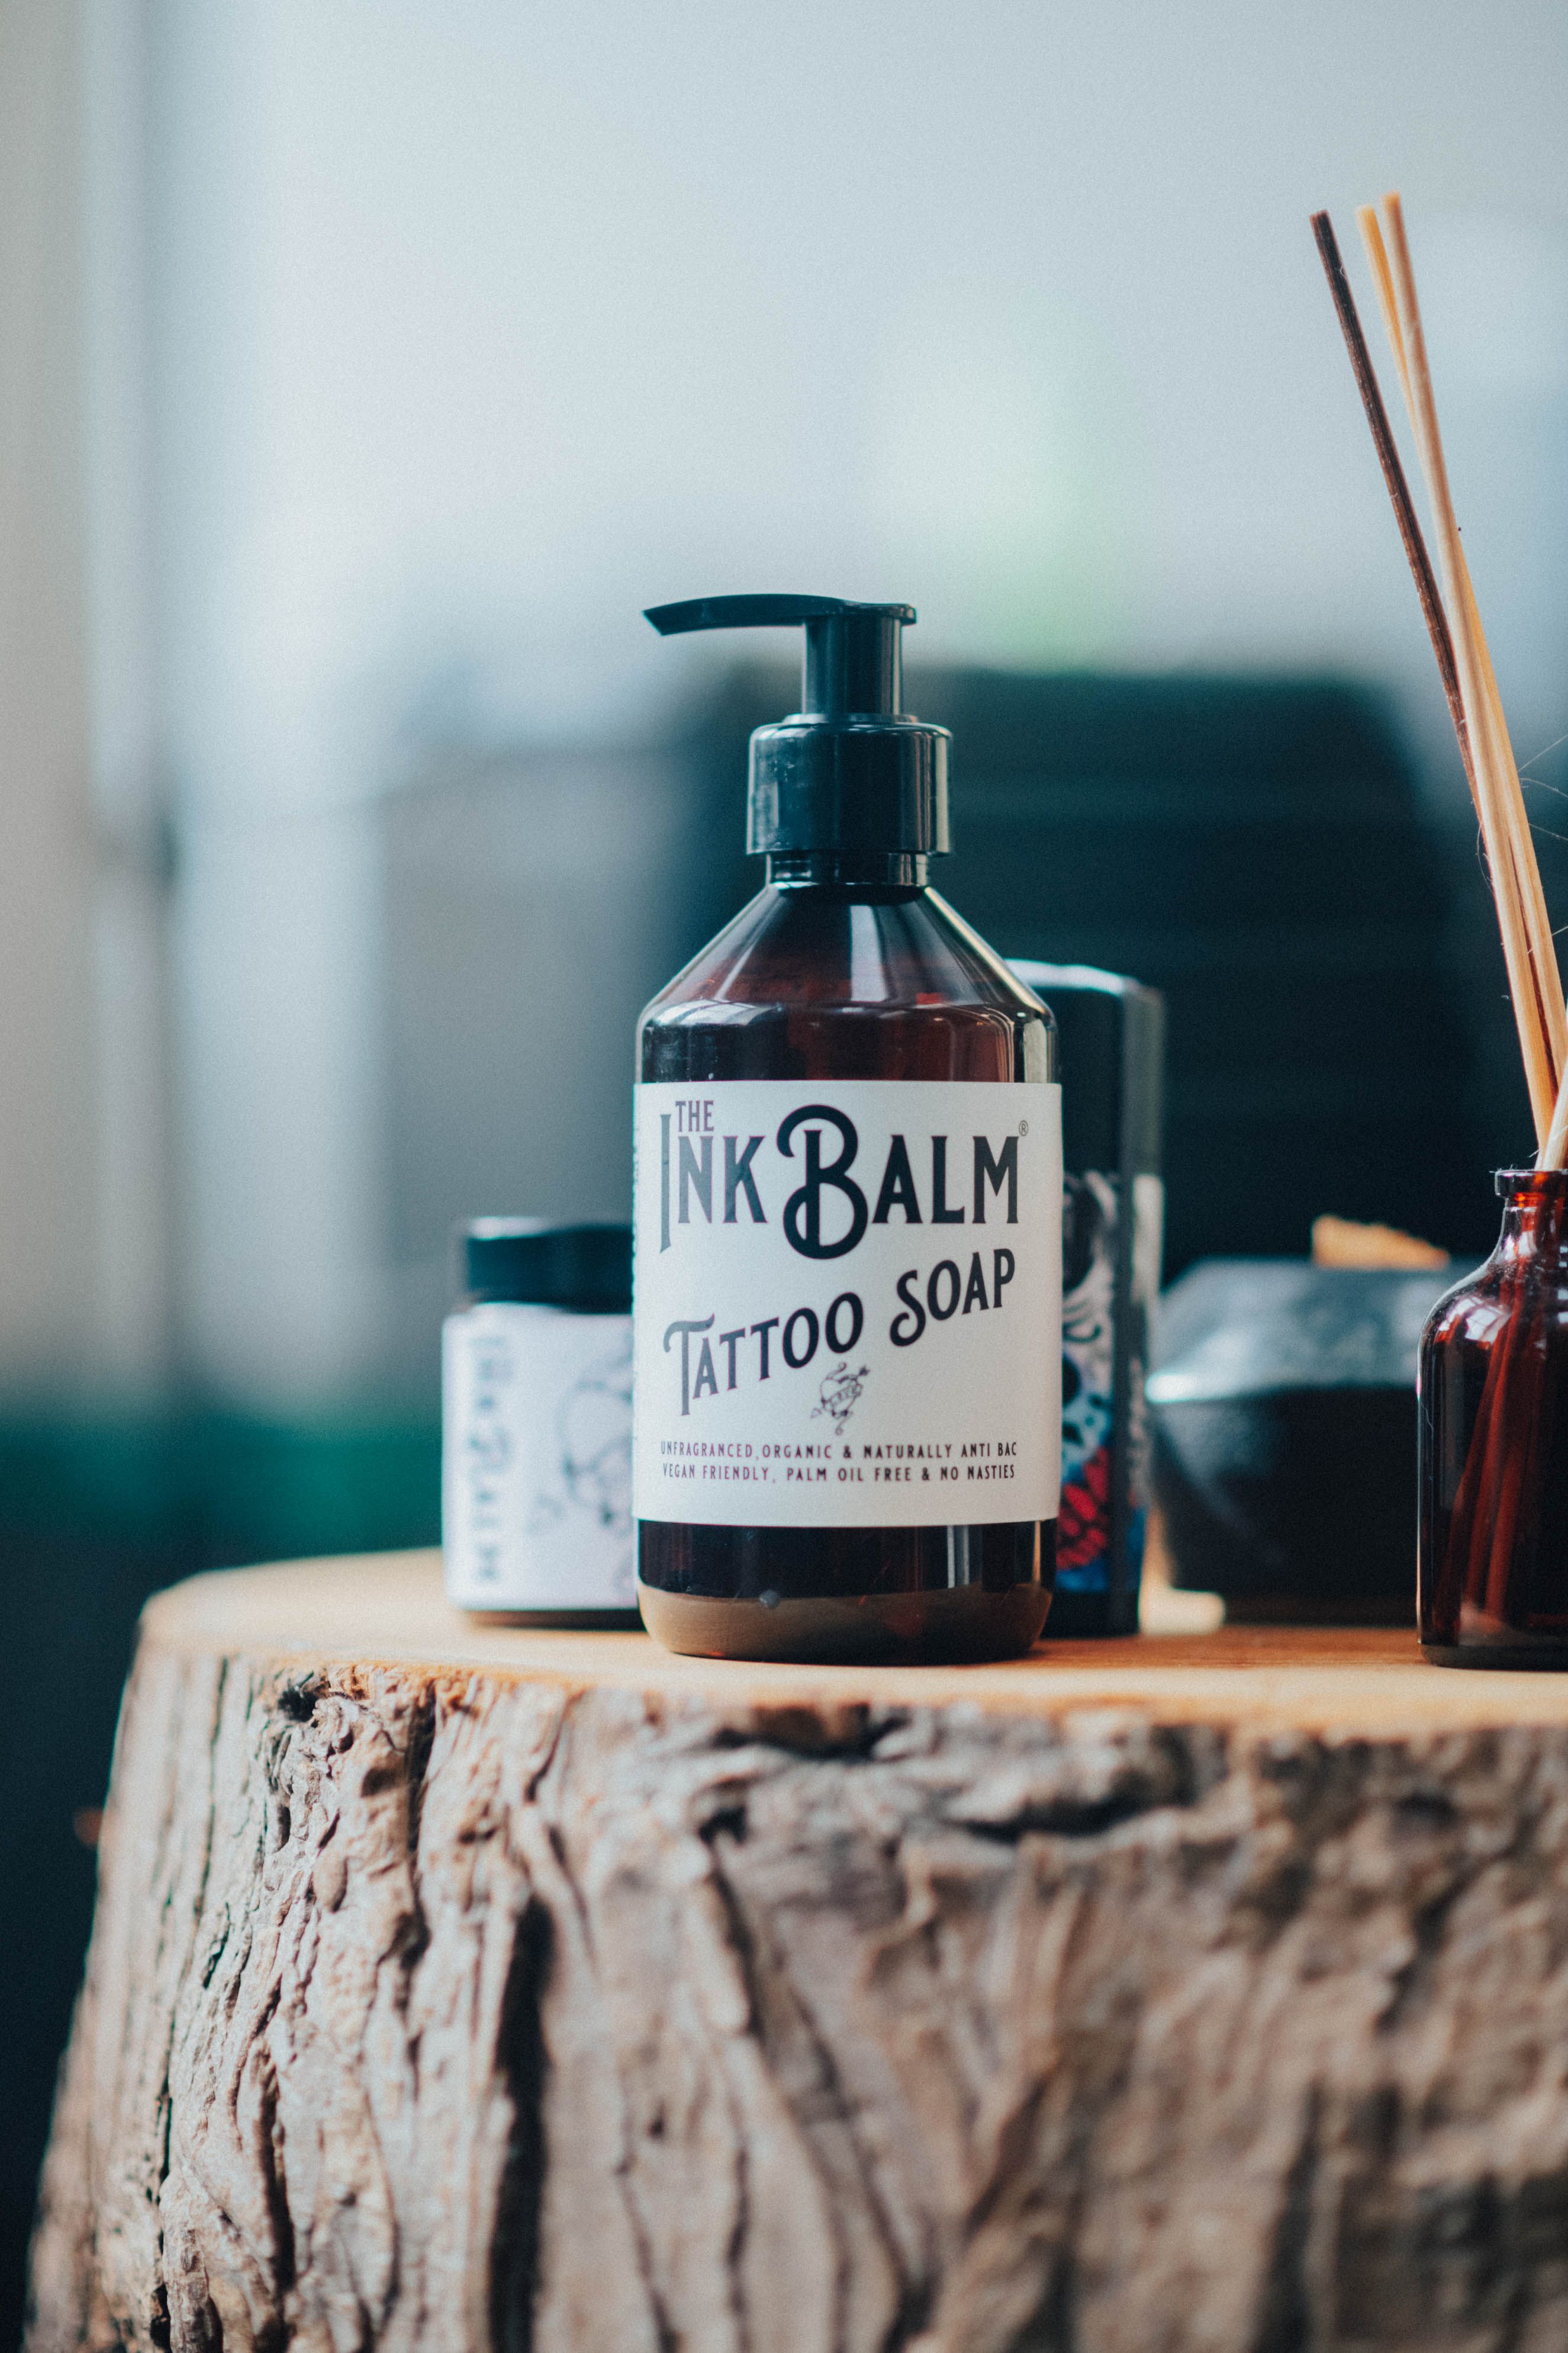 The Ink Balm Tattoo Soap